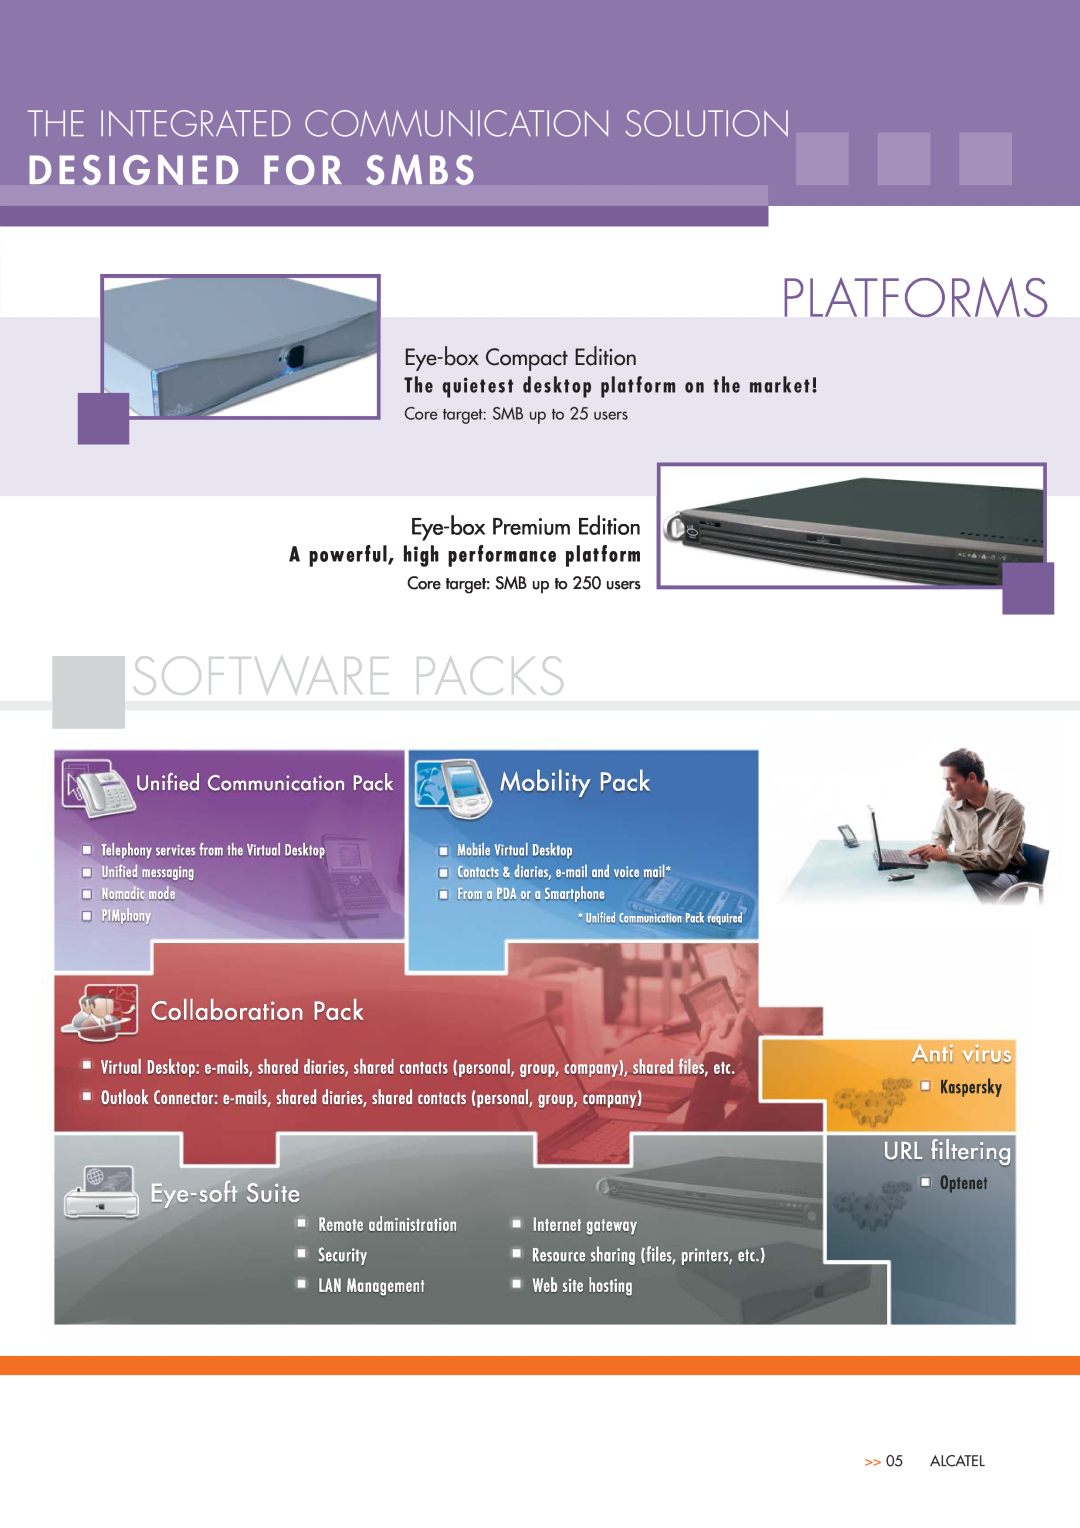 Alcatel-Lucent Eye-Box Software Packs, D E S I G N E D F O R S M B S, The Integrated Communication Solution, Platforms 